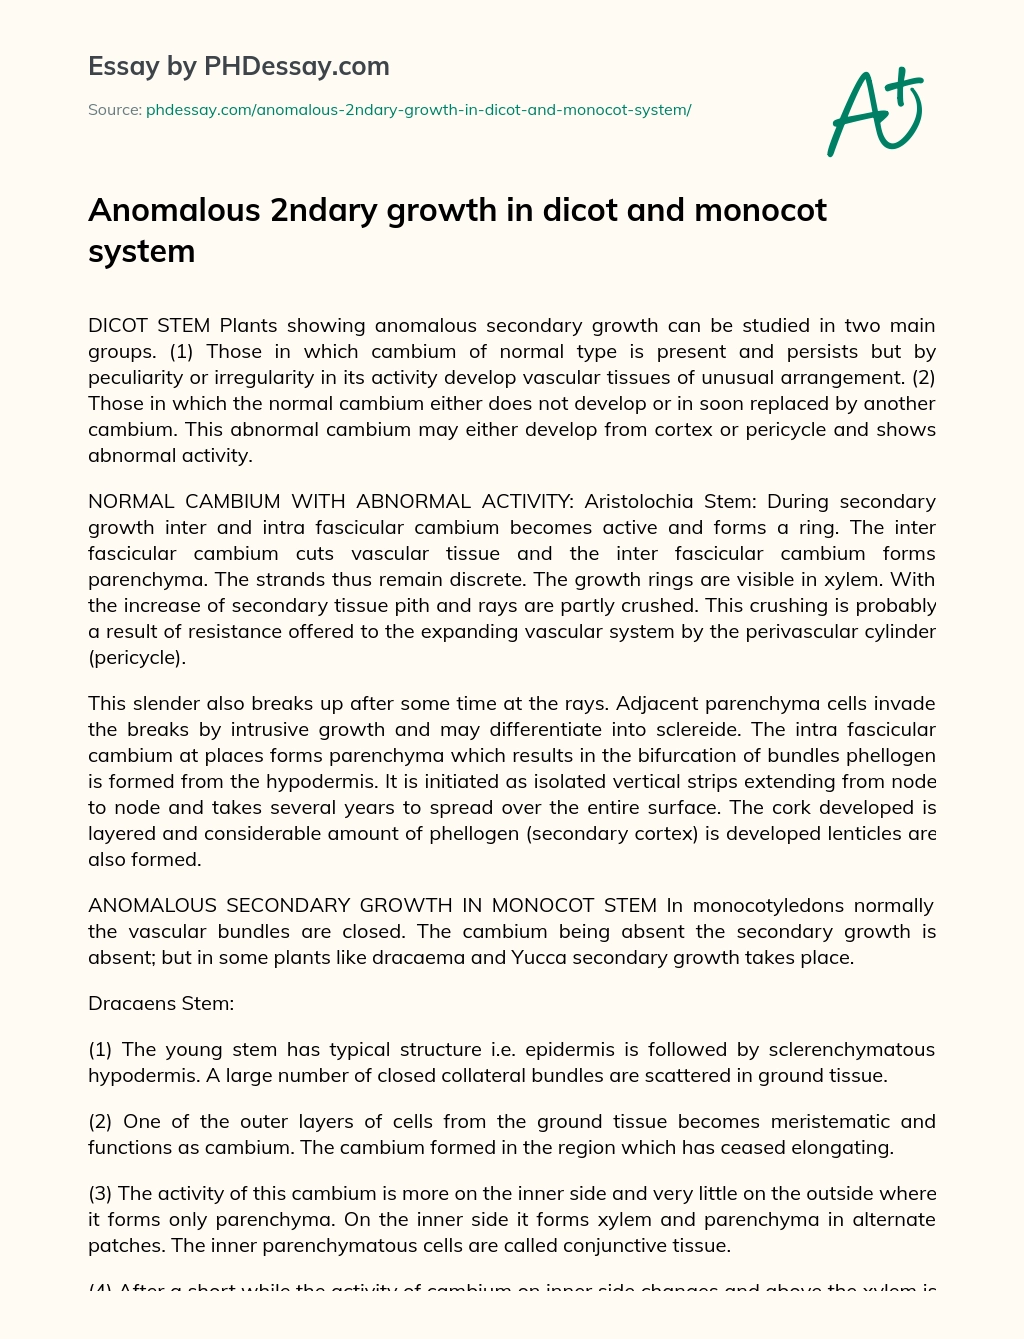 Anomalous 2ndary growth in dicot and monocot system essay